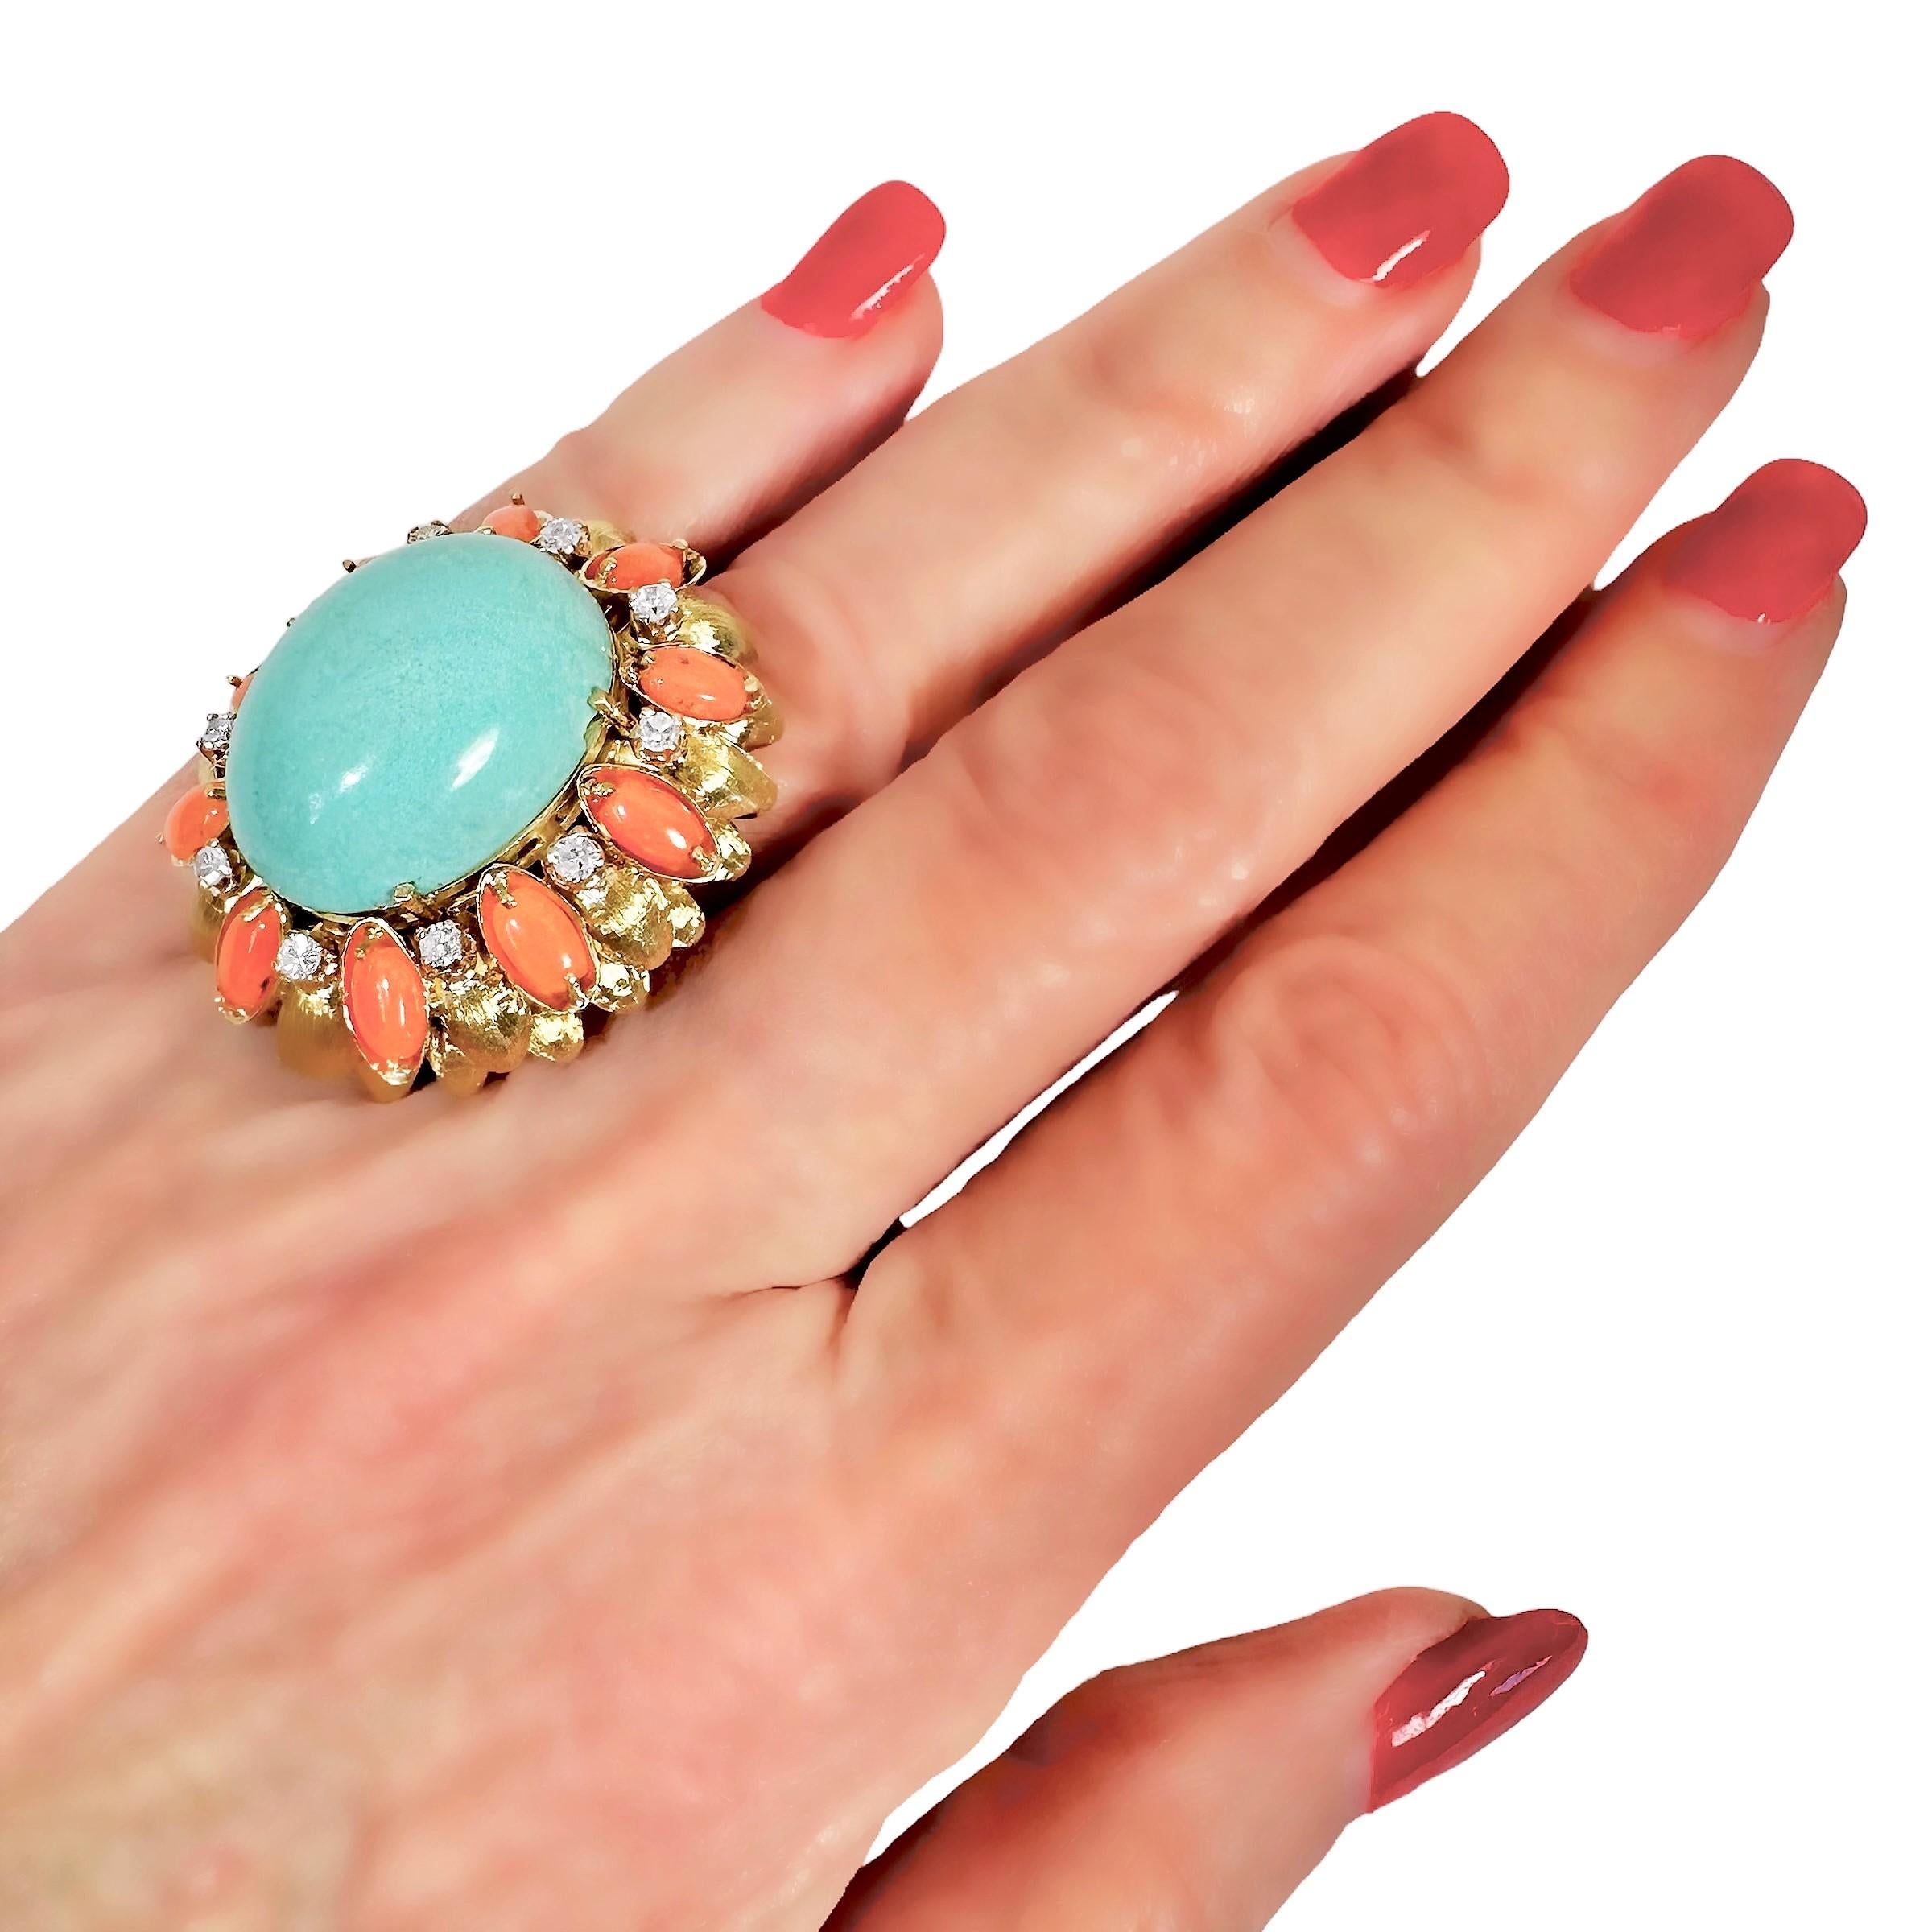 Large Scale Mid-20th Century 18K Yellow Gold, Coral, Turquoise and Diamond Ring 4